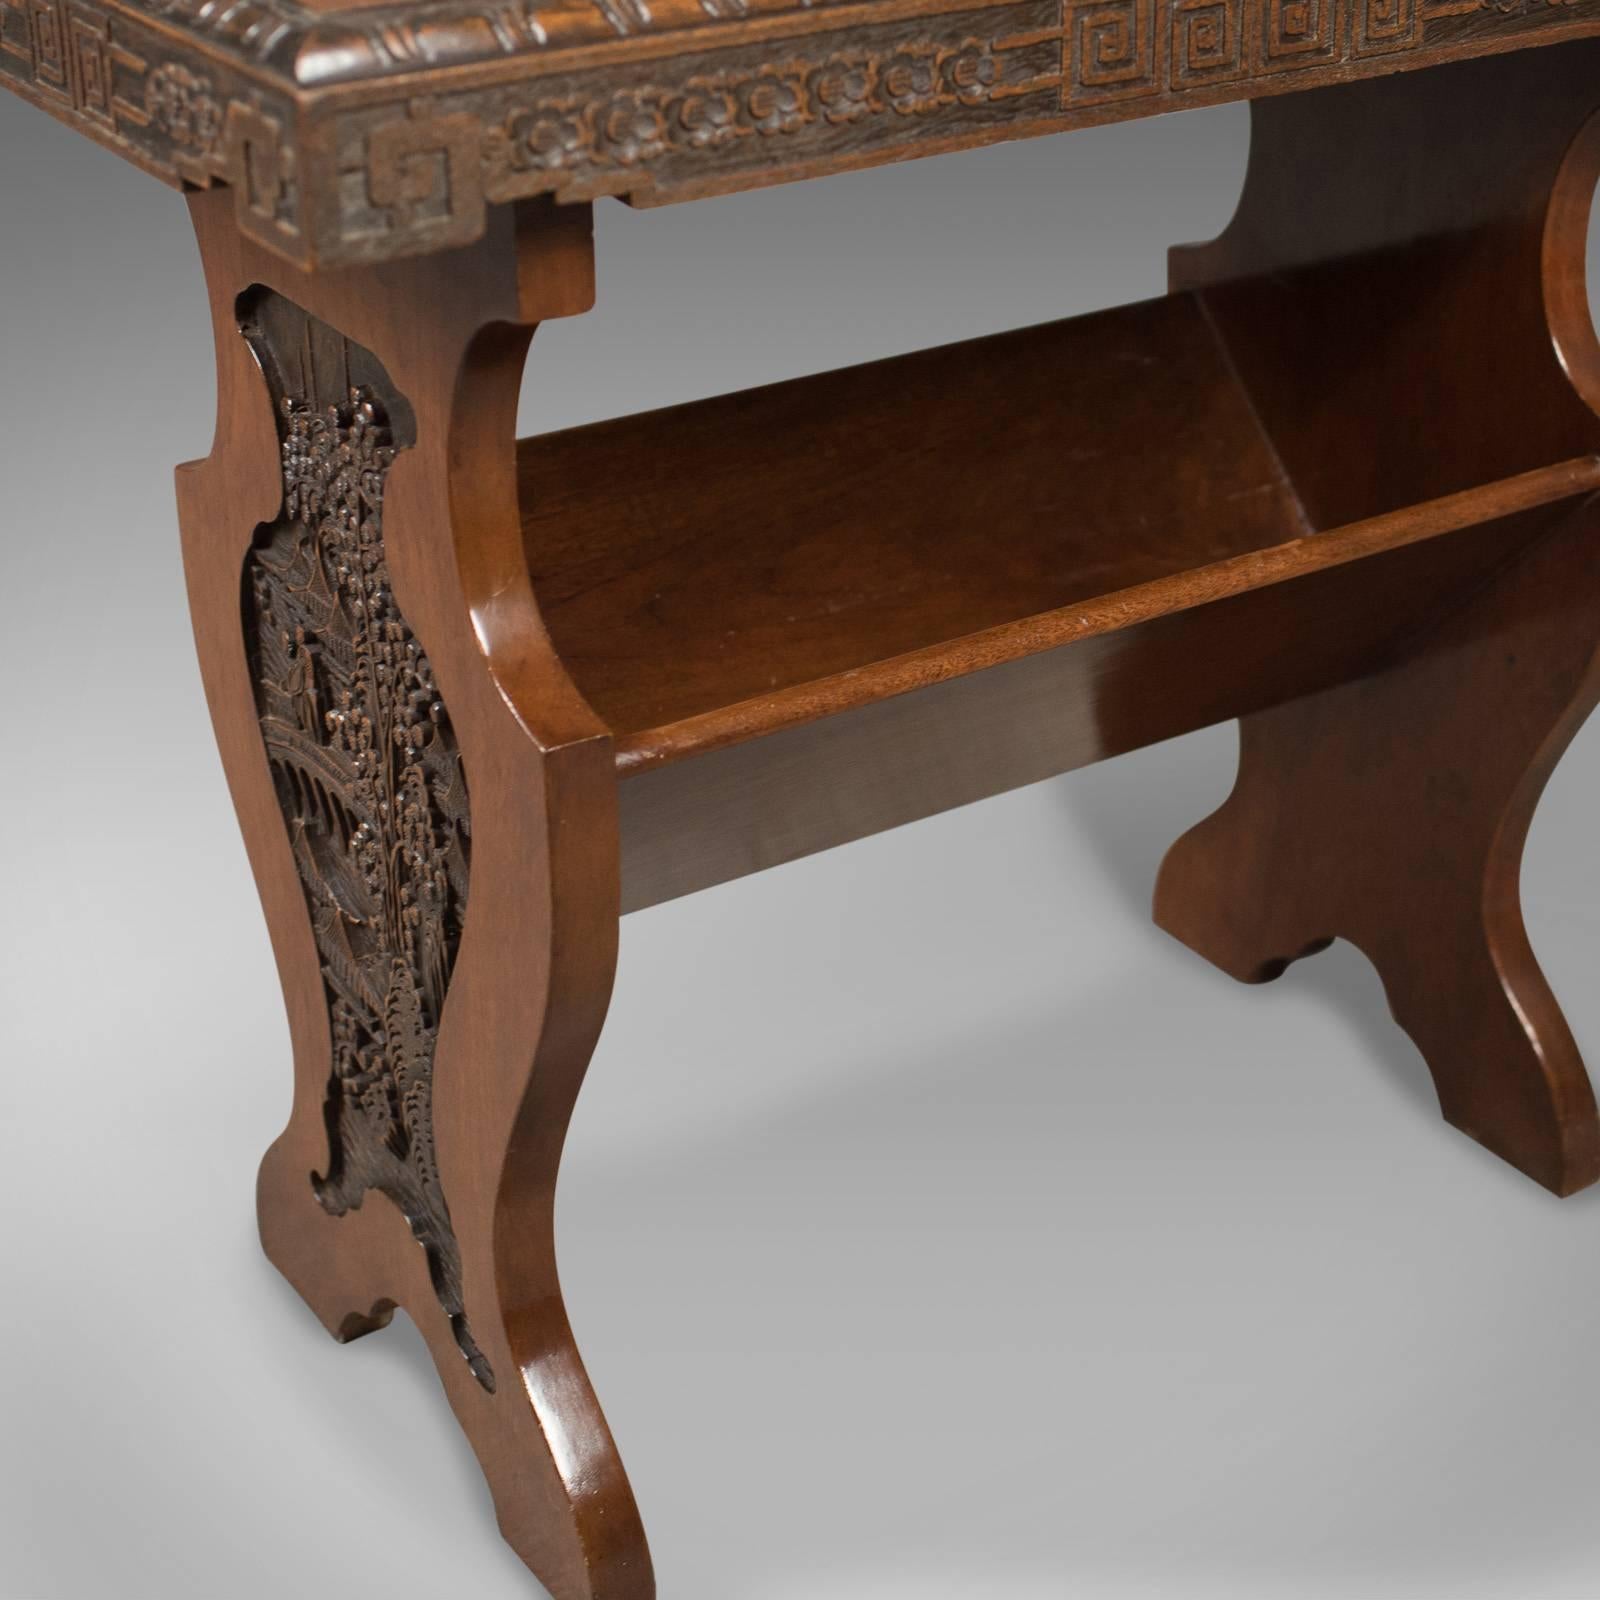 Chinese Antique Book Trough Side Table, Oriental Walnut, circa 1910